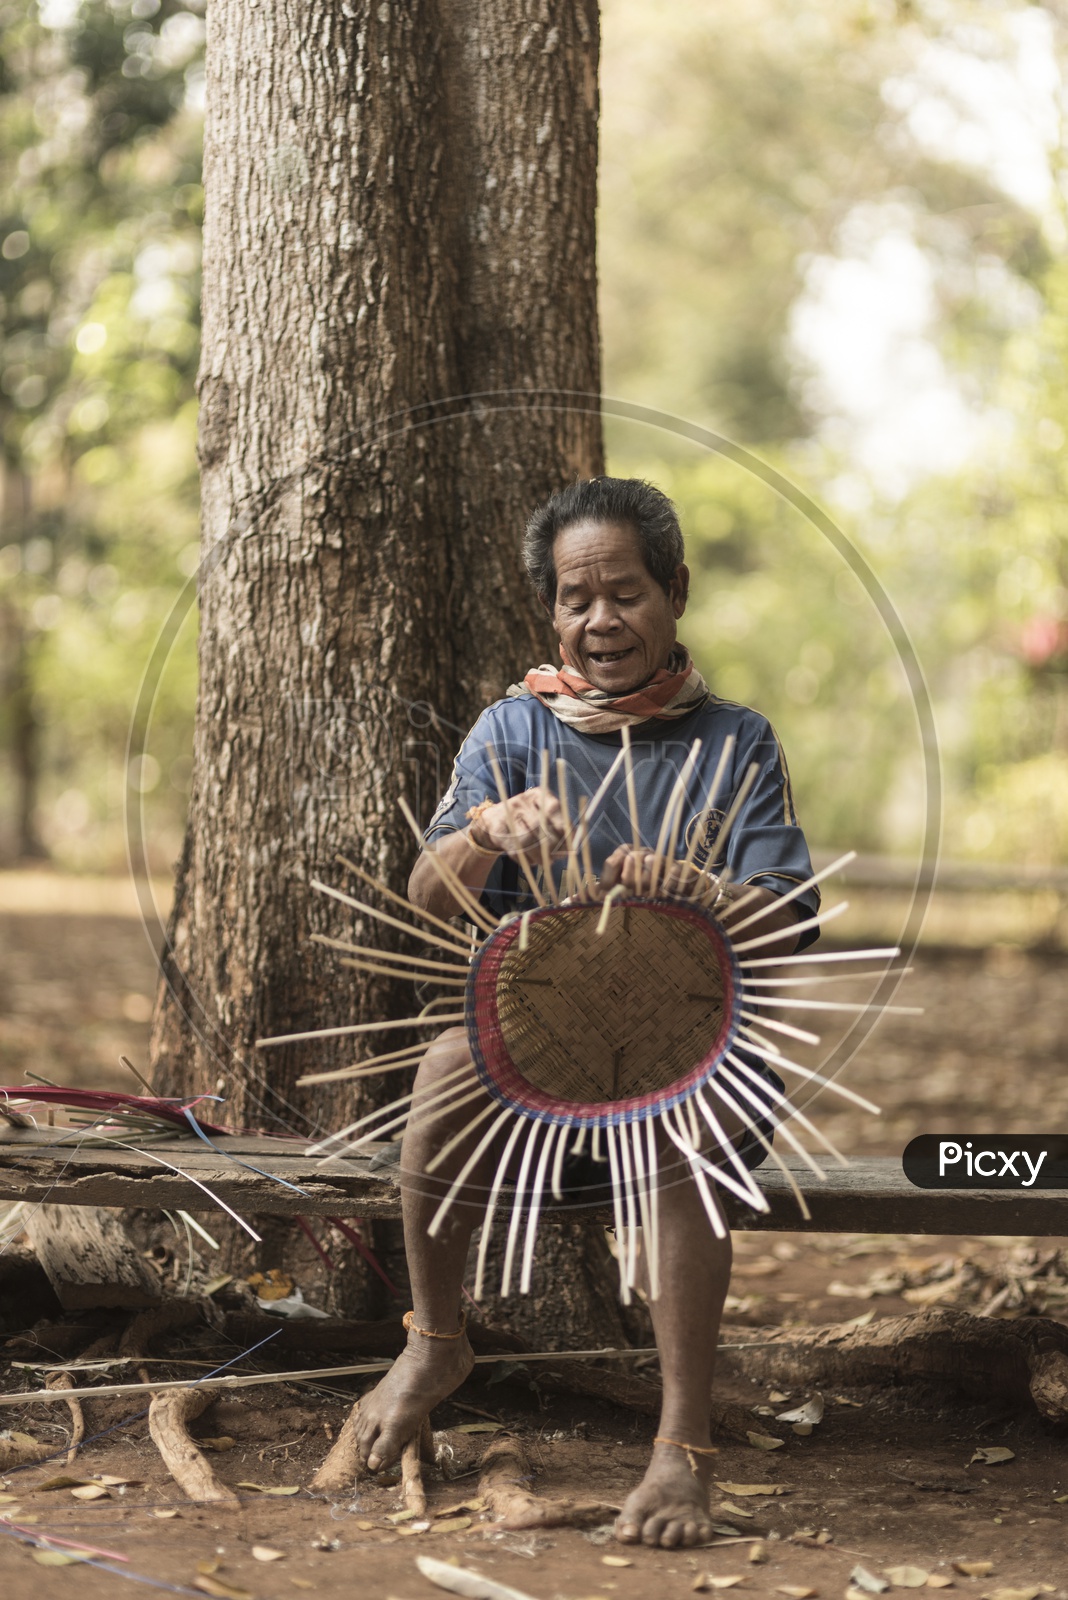 Alak tribe man Crafting of Thatched Specimens in village near plateau Bolaven, Laos